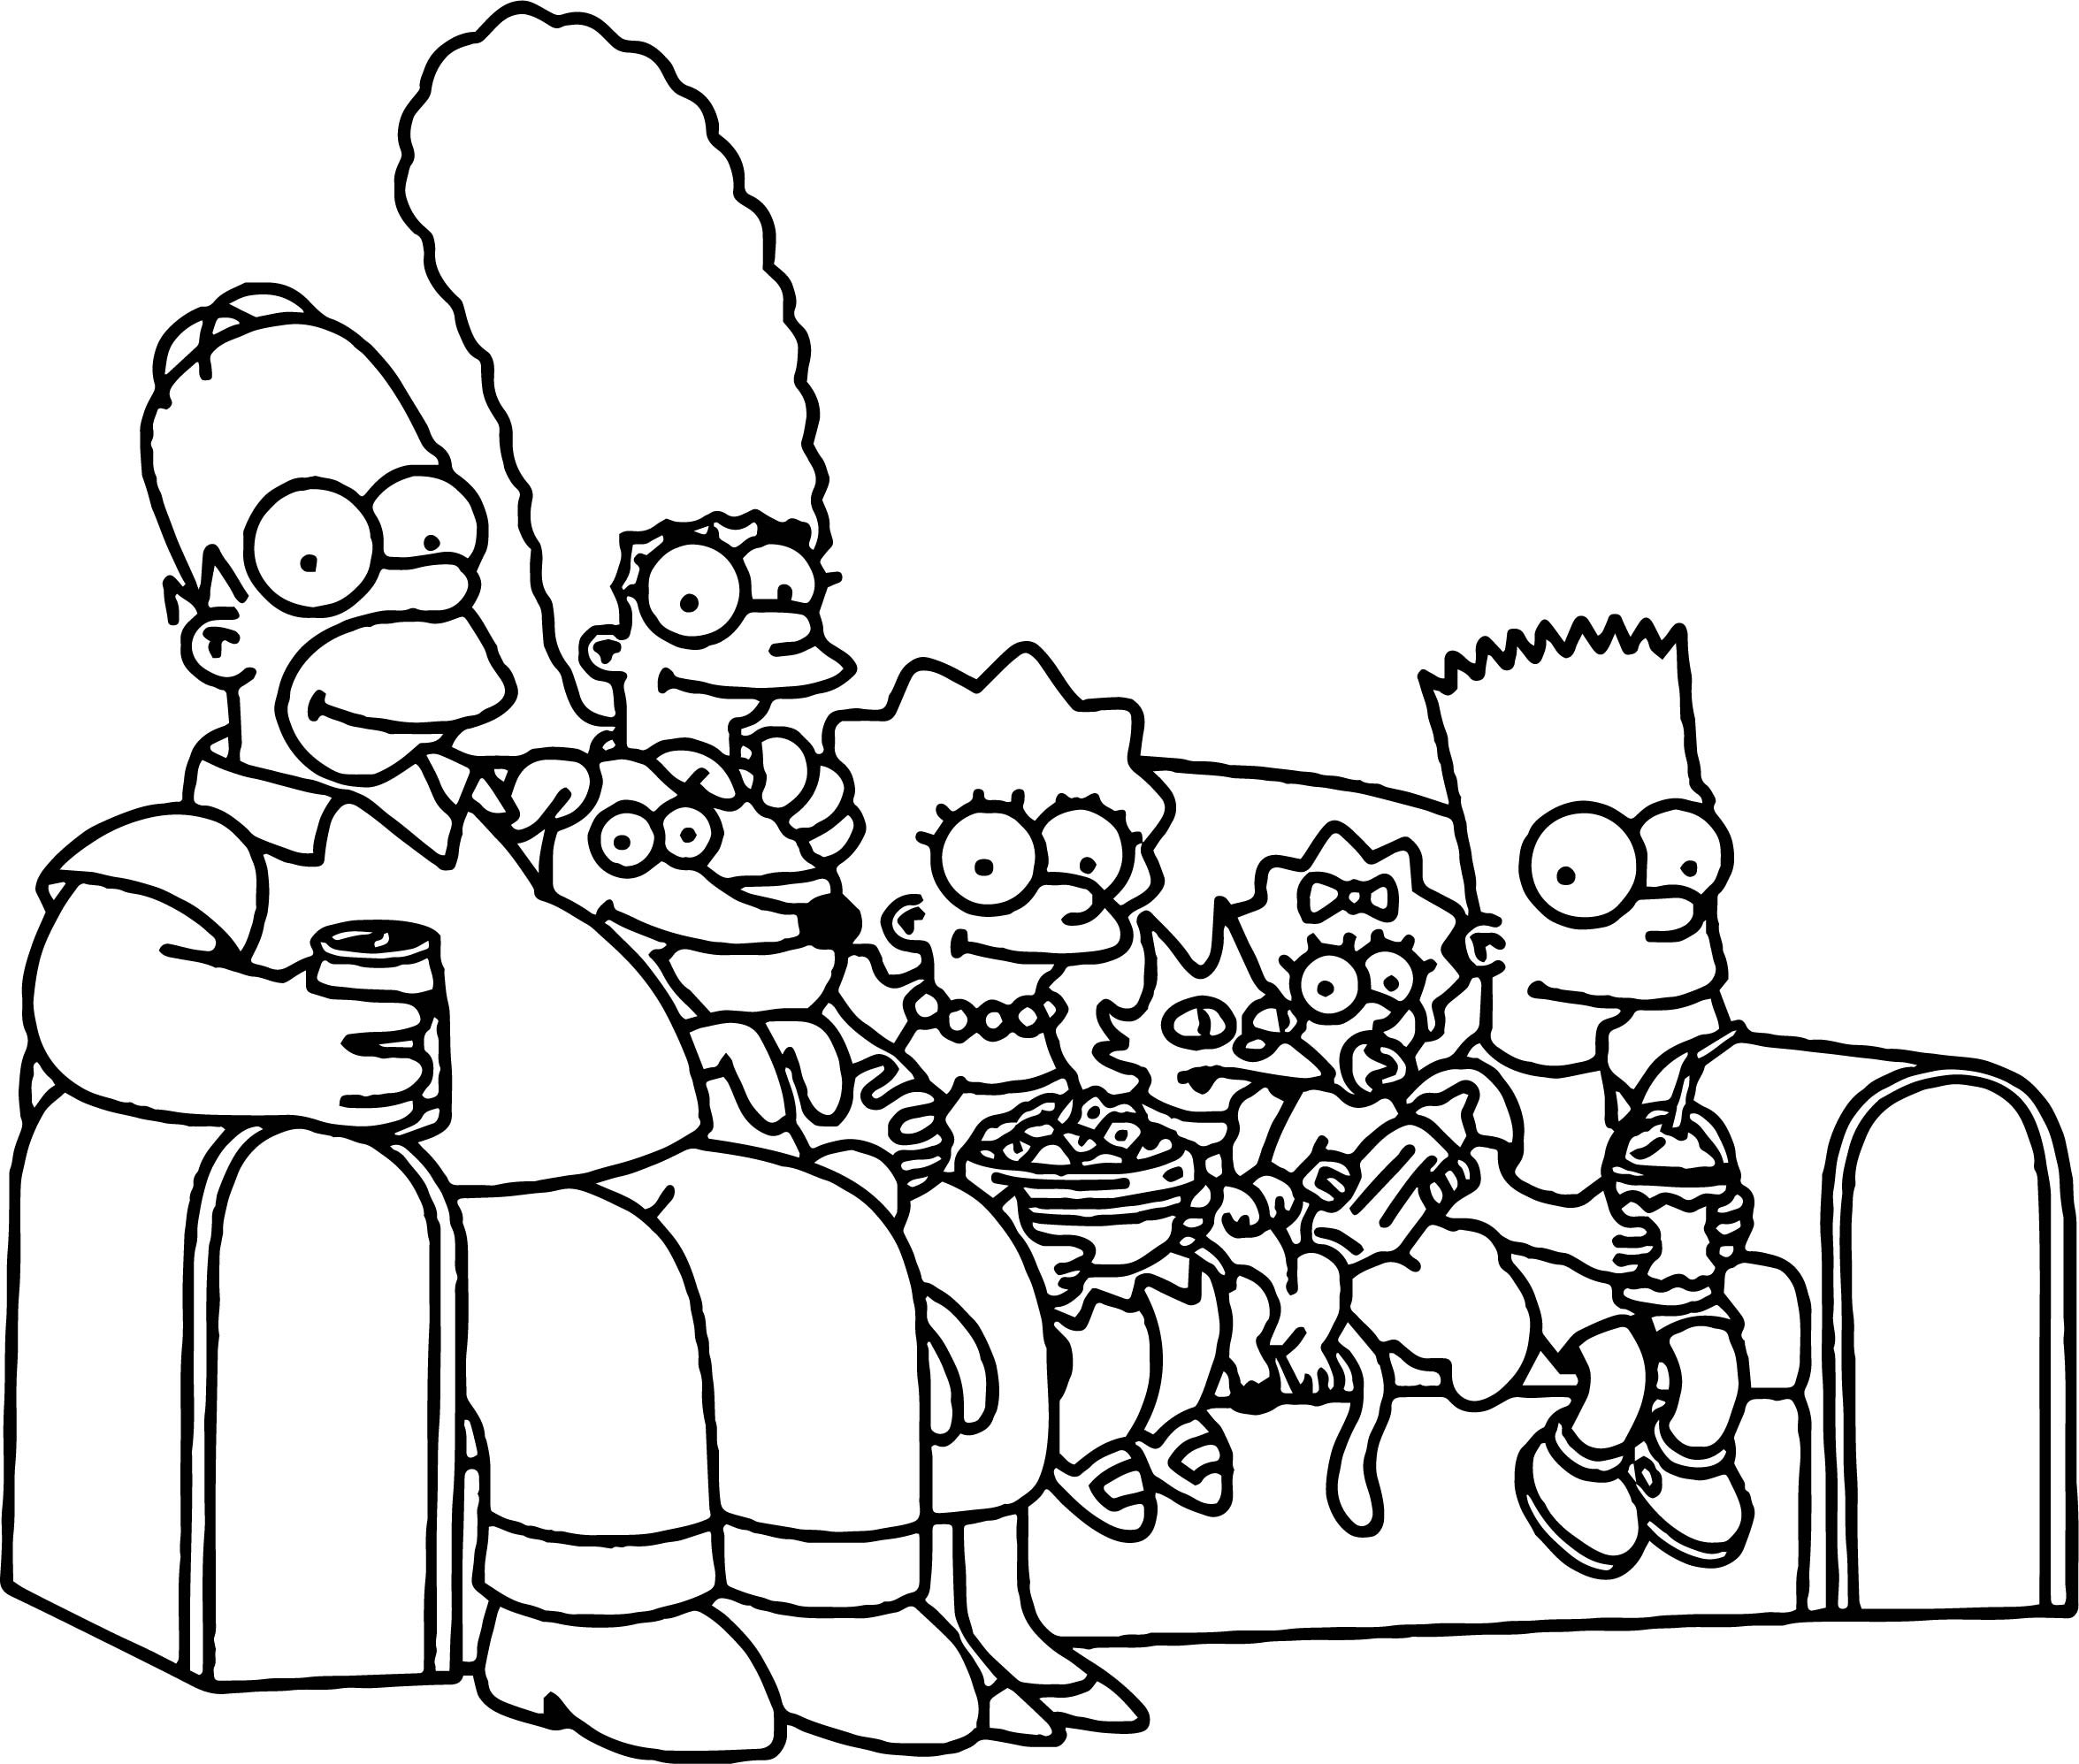 Simpsons Coloring Pages Printable And Free